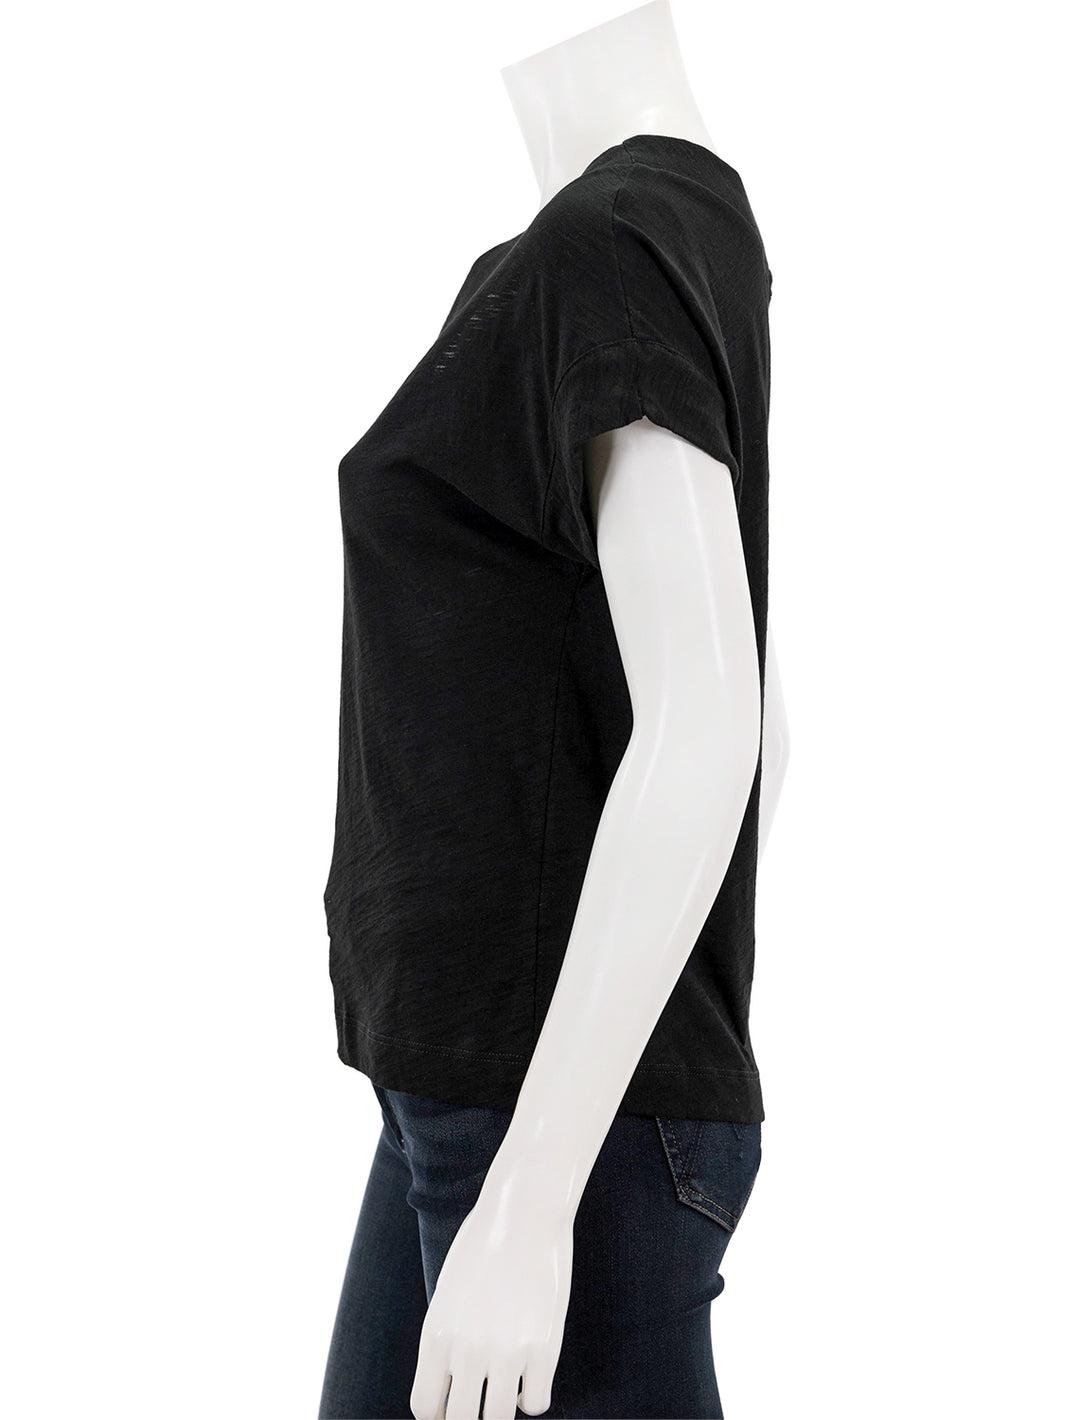 Side view of Goldie Lewinter's mariana basic v neck in black.